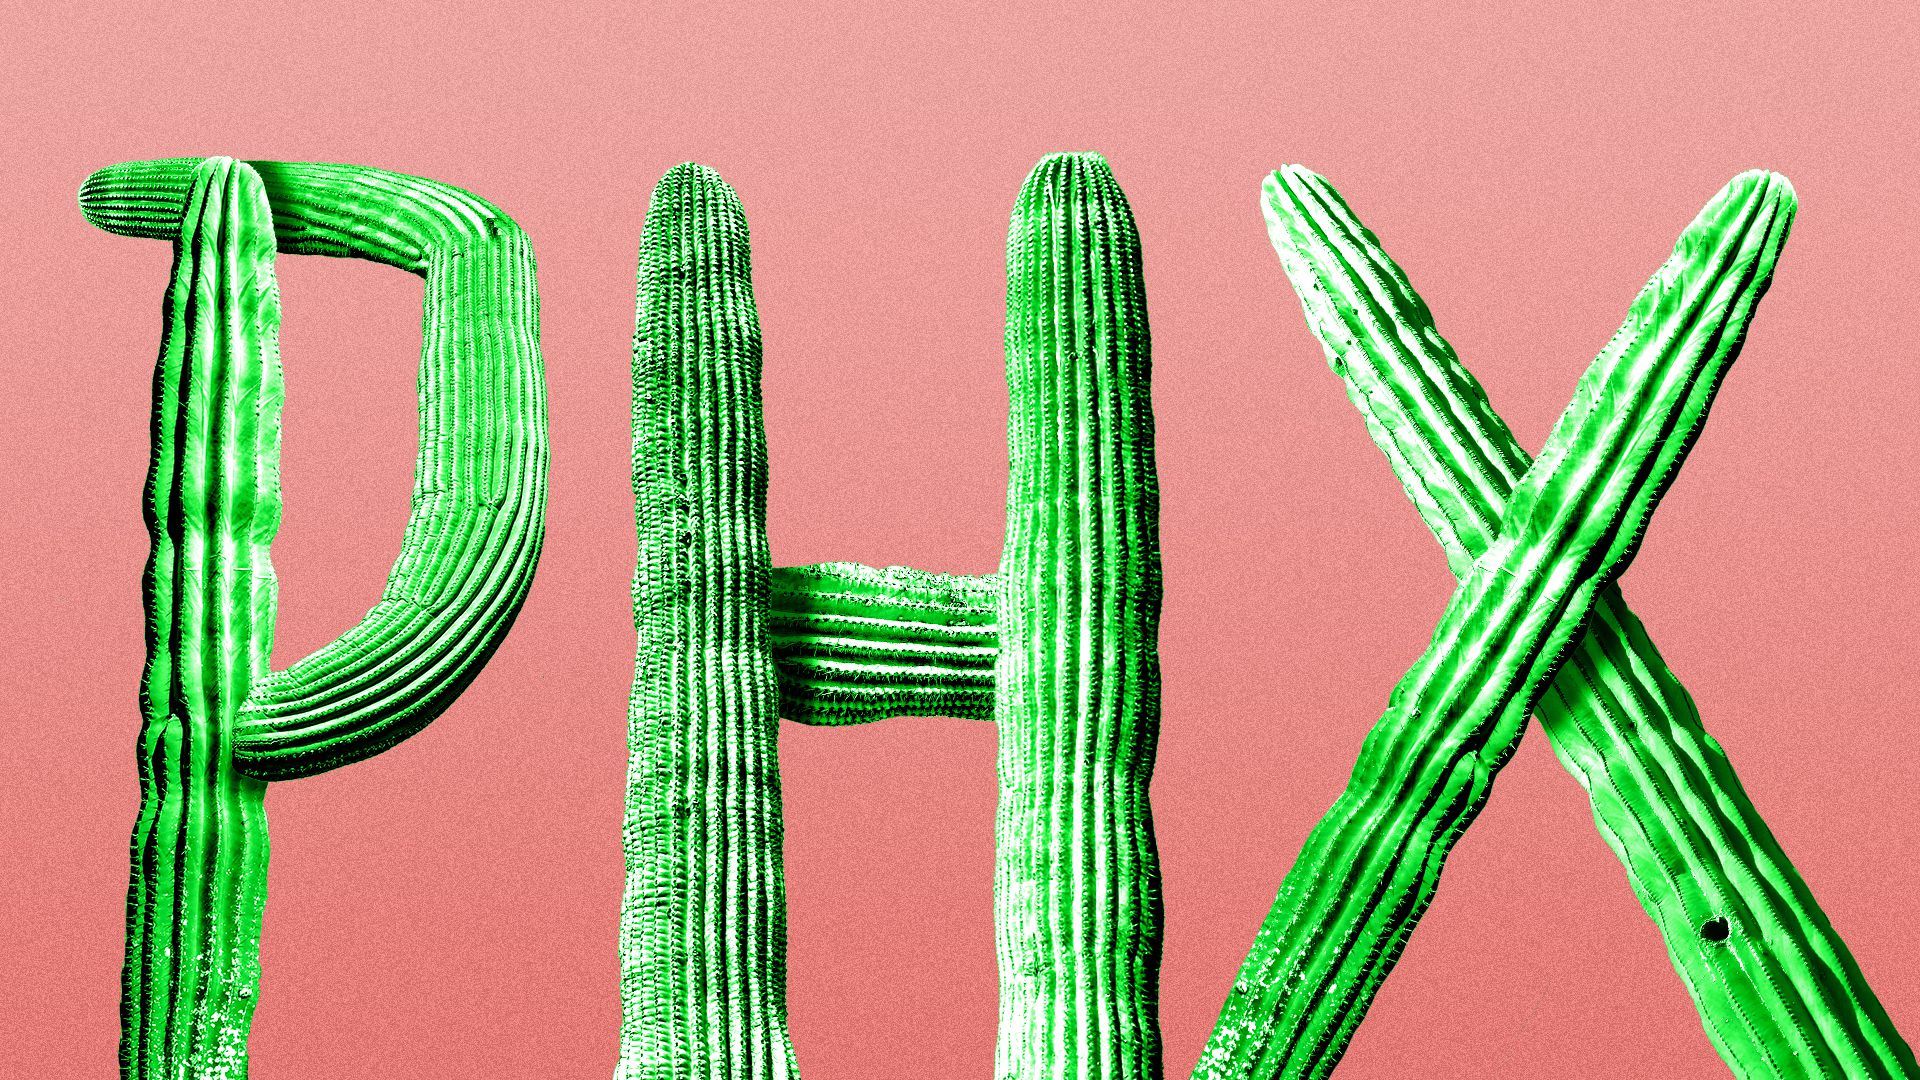 Illustration of the letters PHX spelled out in cacti.